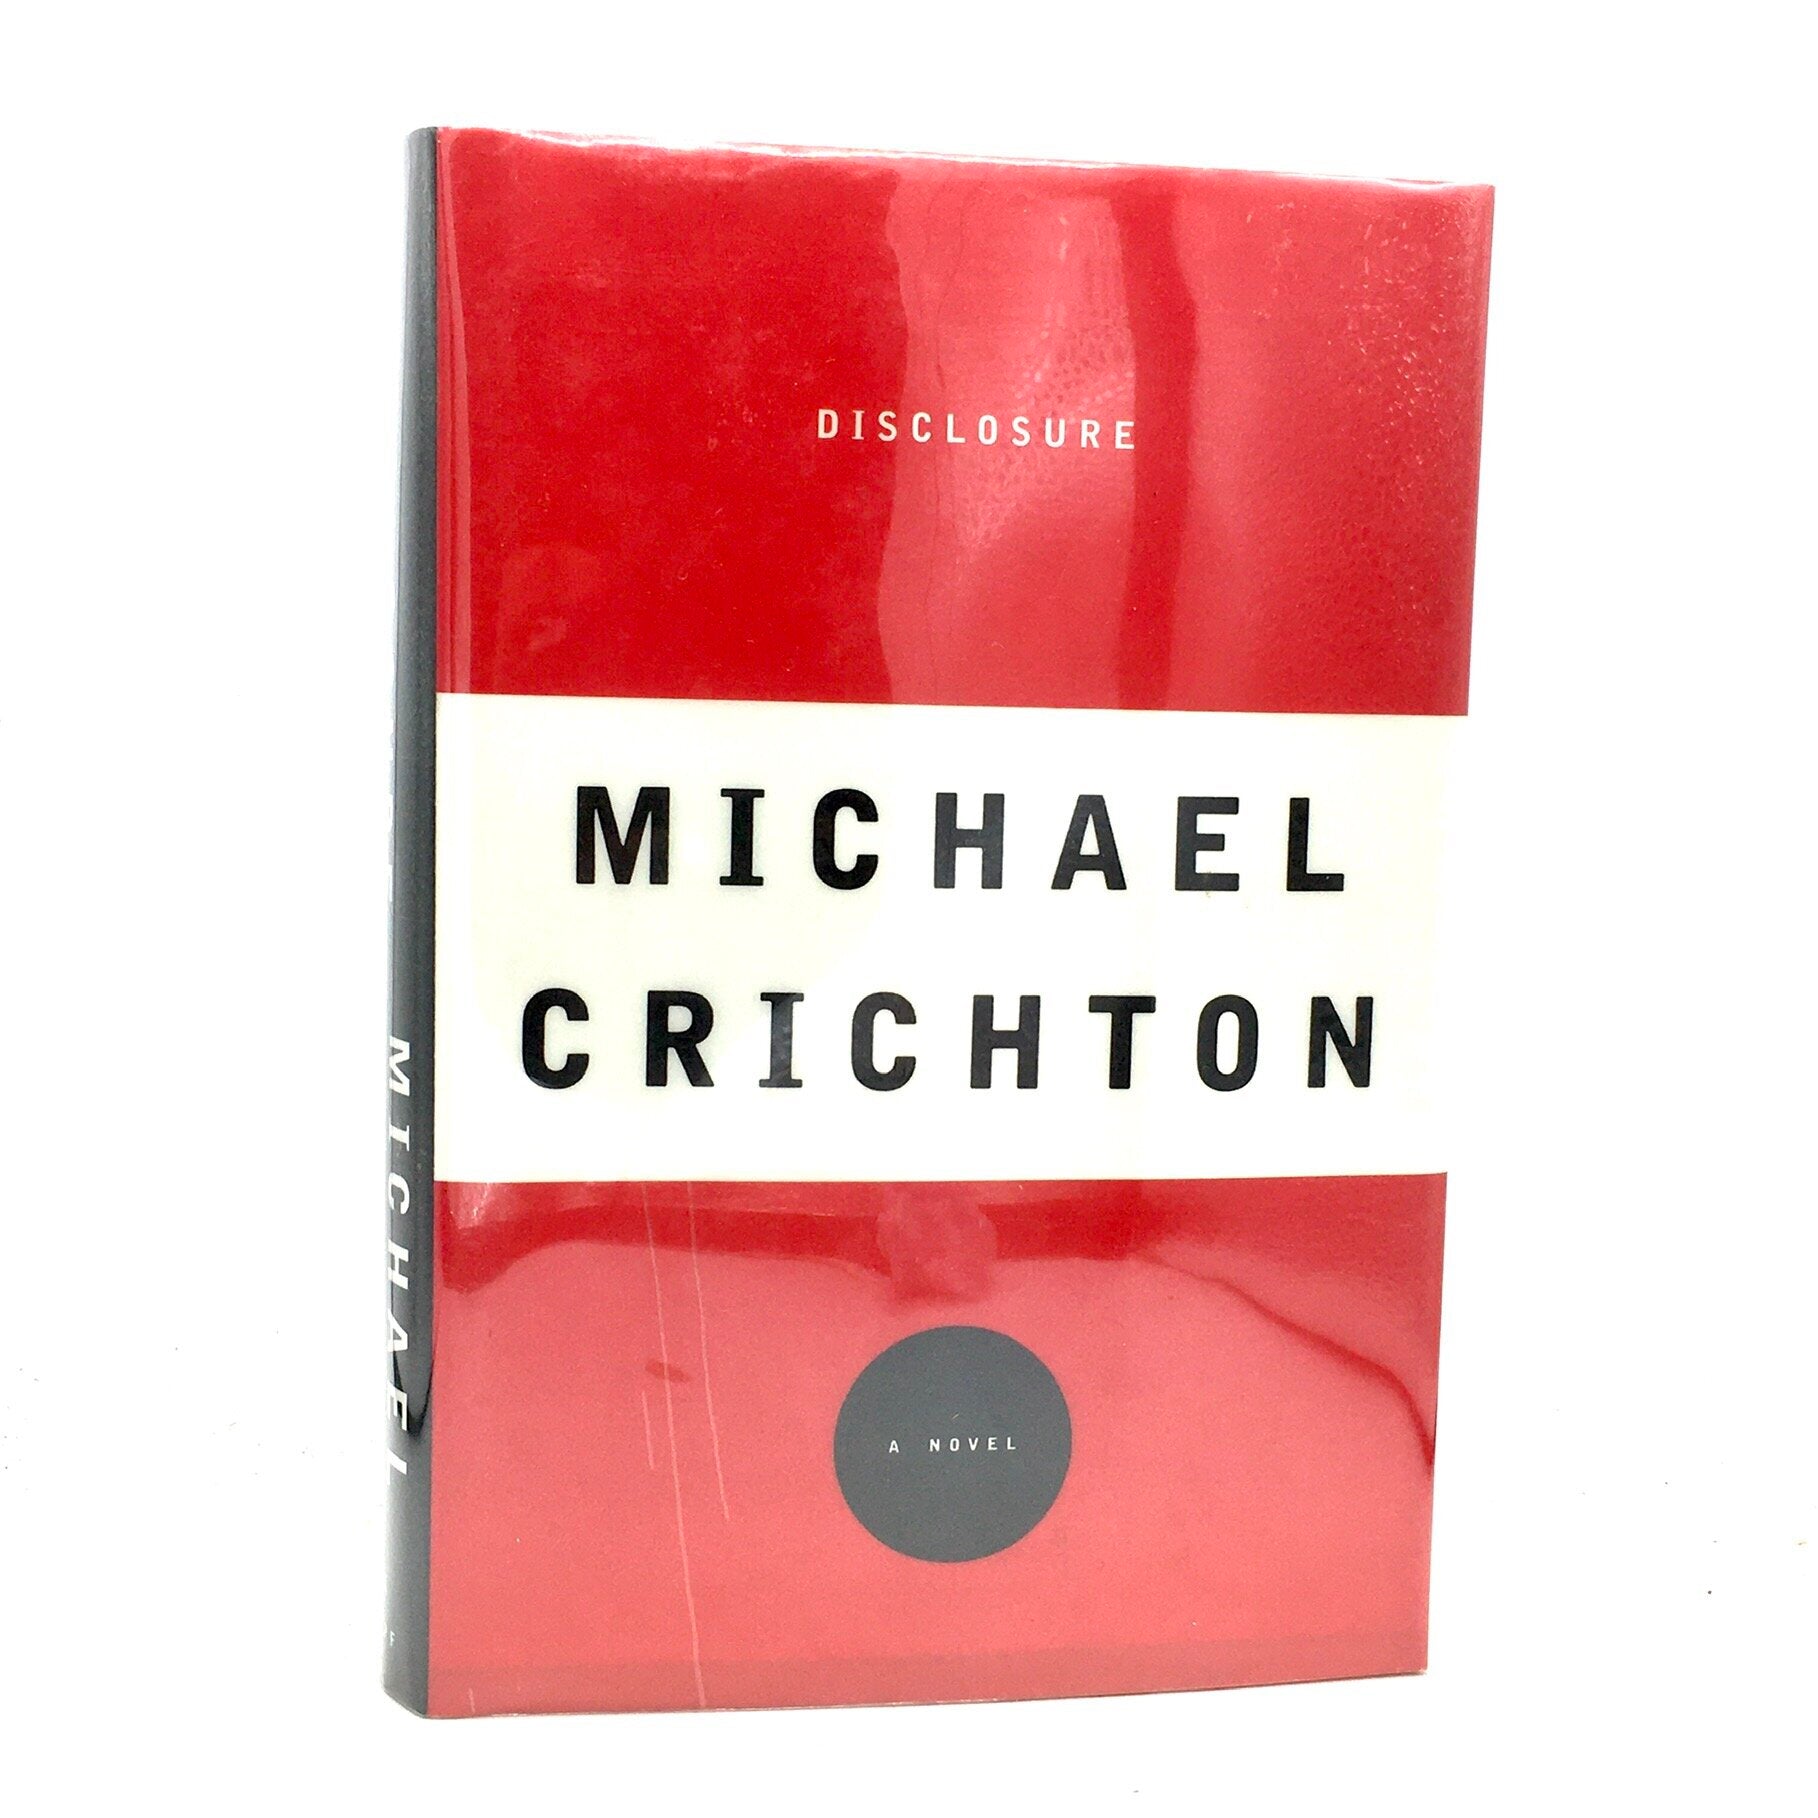 CRICHTON, Michael "Disclosure" [Alfred A. Knopf, 1993] 1st Edition (Signed) - Buzz Bookstore